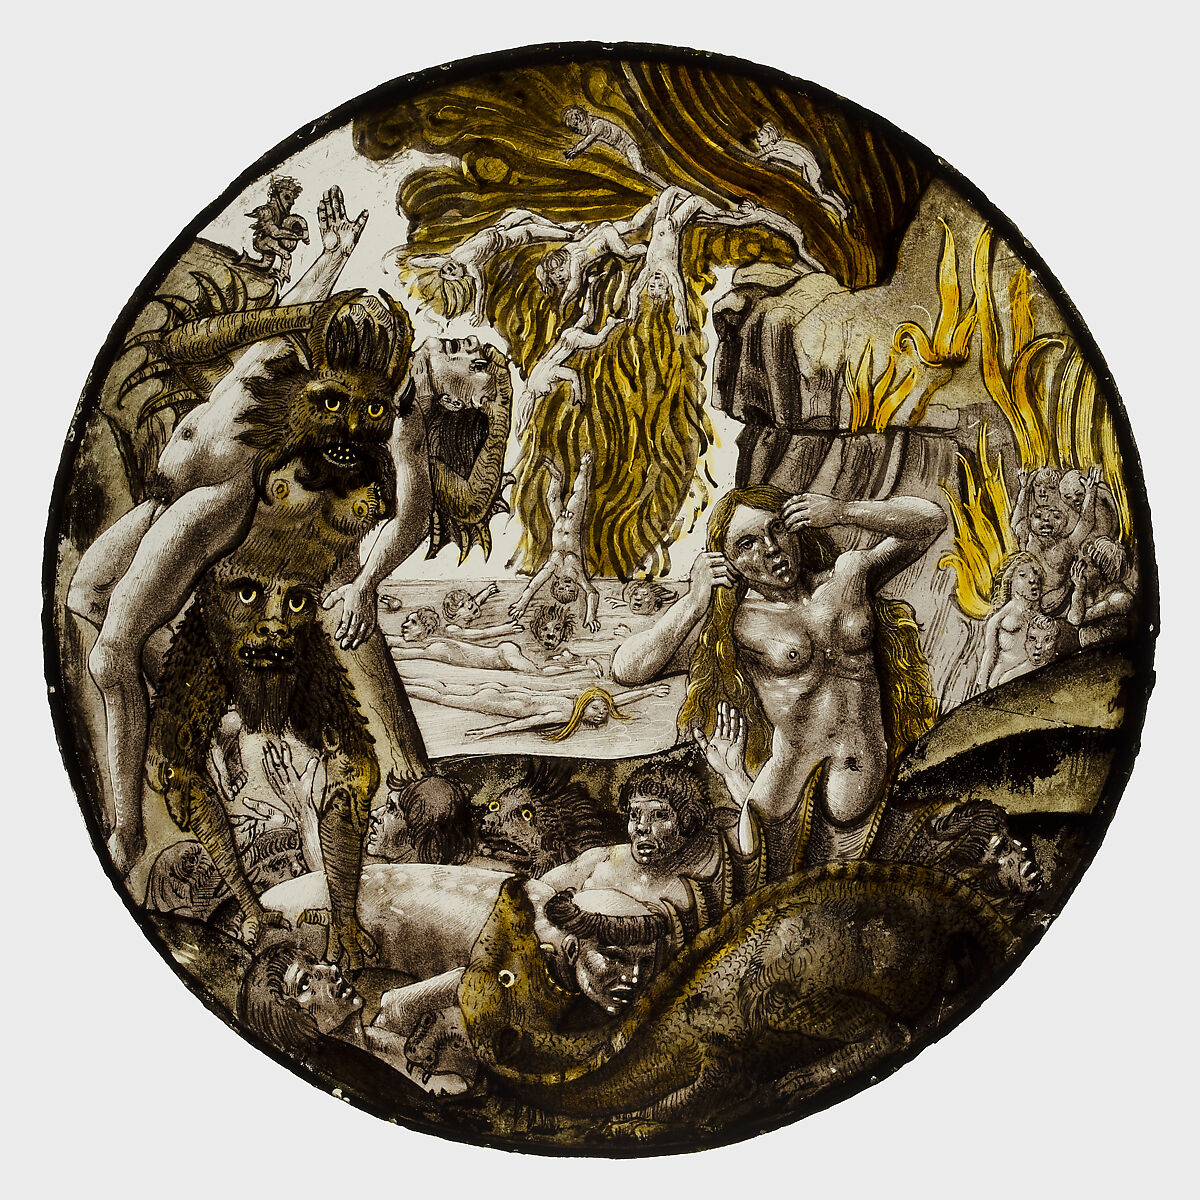 Roundel with Souls Tormented in Hell, After Dieric Bouts (Netherlandish, Haarlem, active by 1457–died 1475), Colorless glass, silver stain, vitreous paint, South Netherlandish 